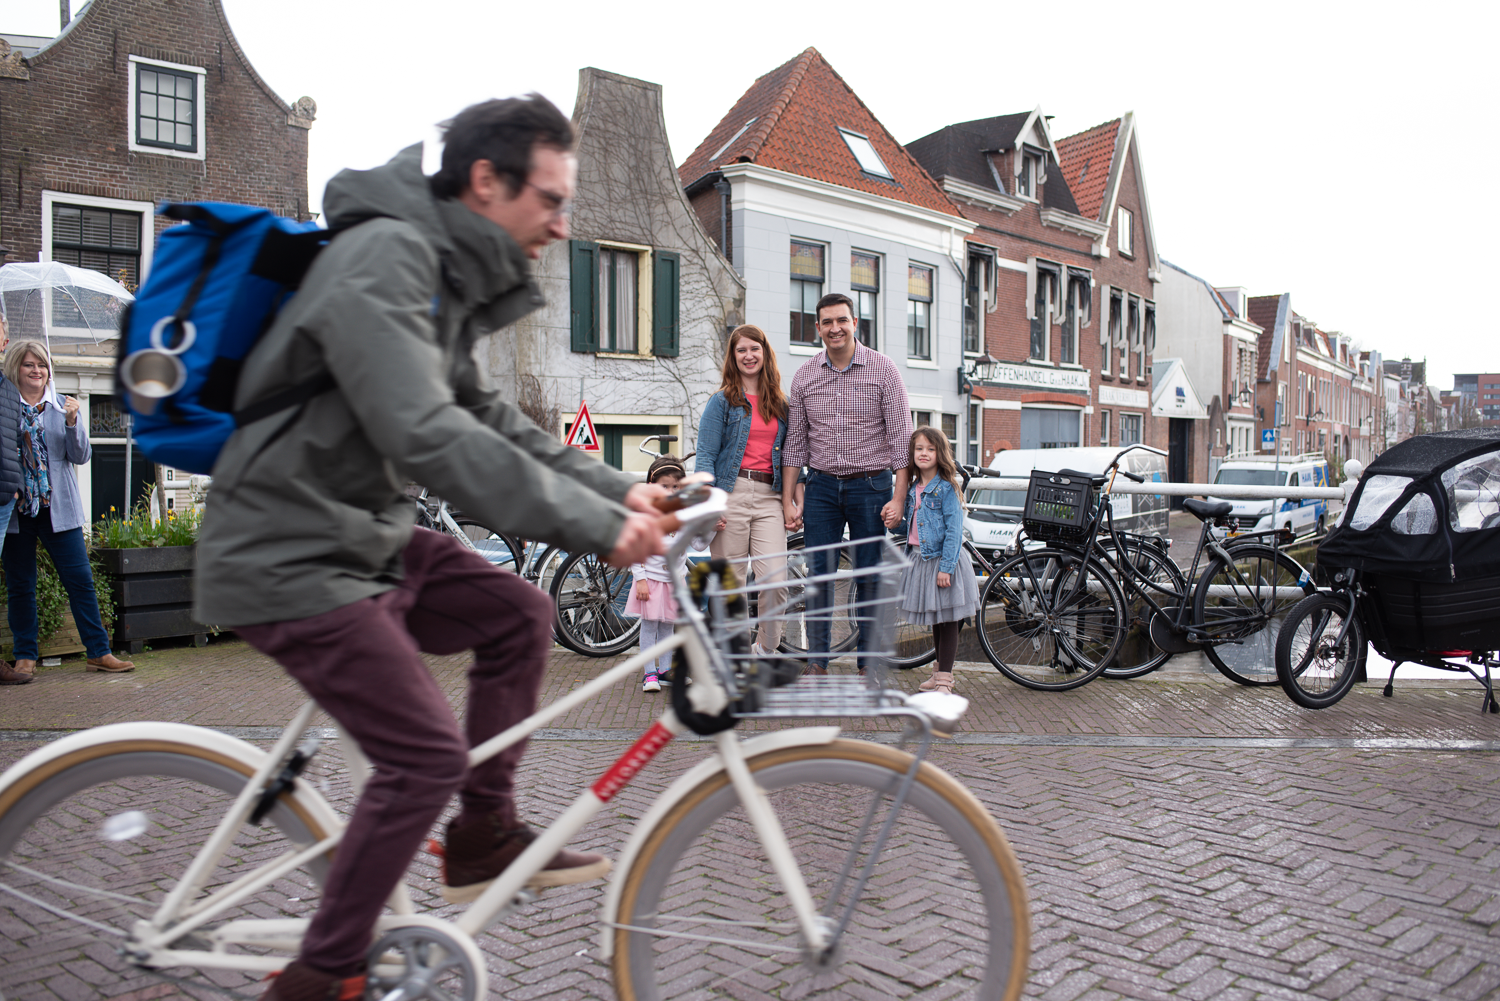 Family Photoshoot in Amsterdam by Vicky McLachlan Photography | South African Family with a man on a bike photoboming the photo_3-1.png